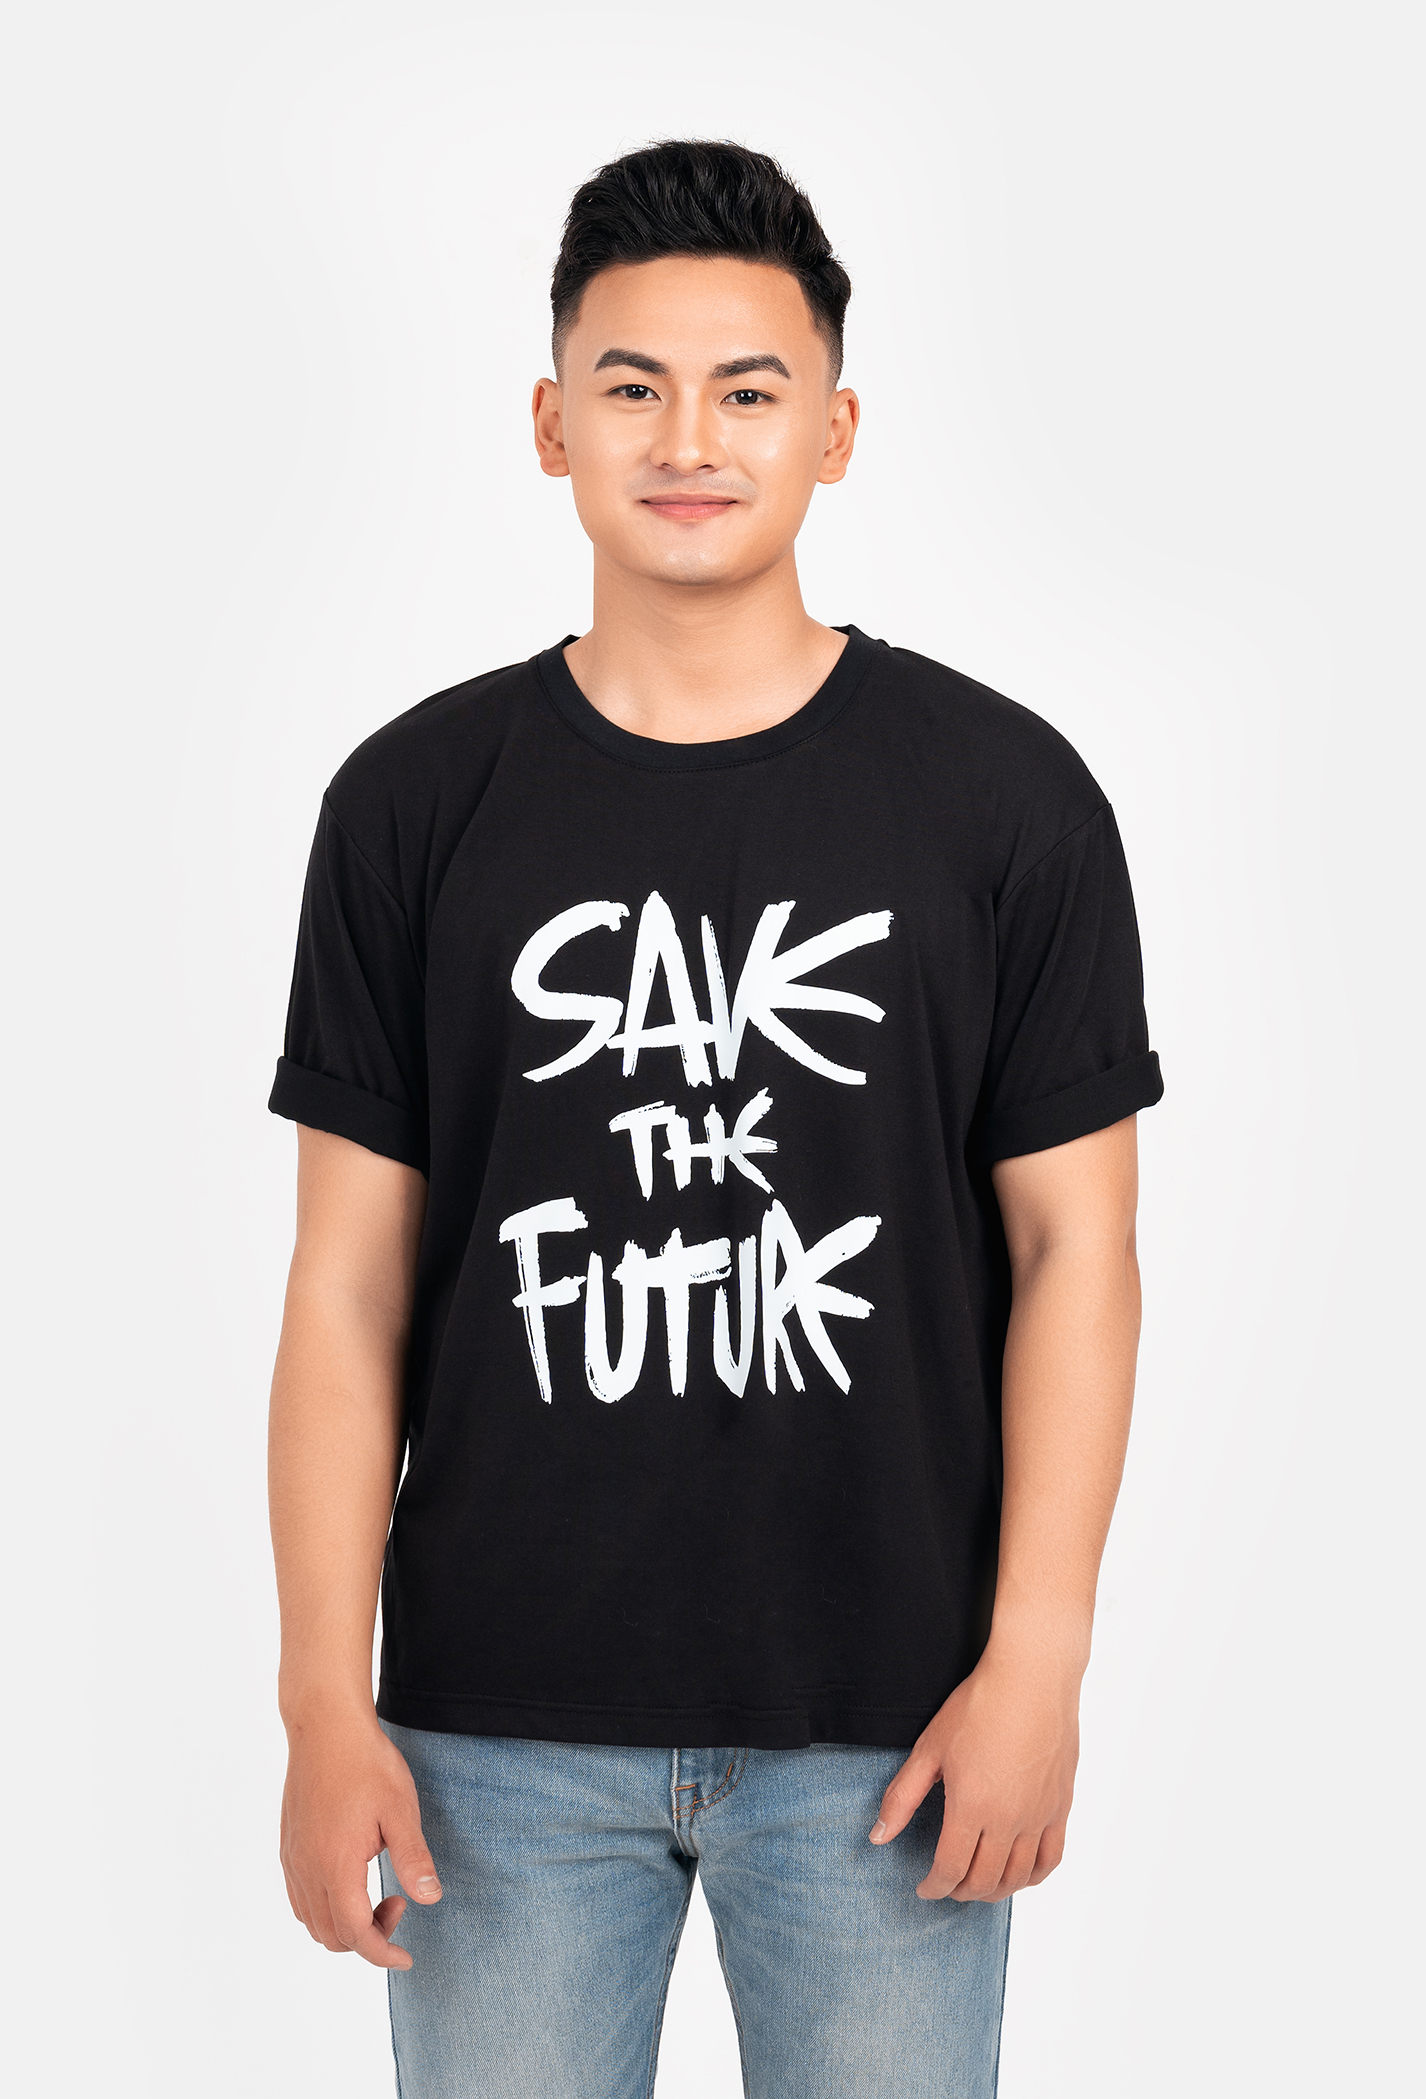 T-Shirt Save The Future 